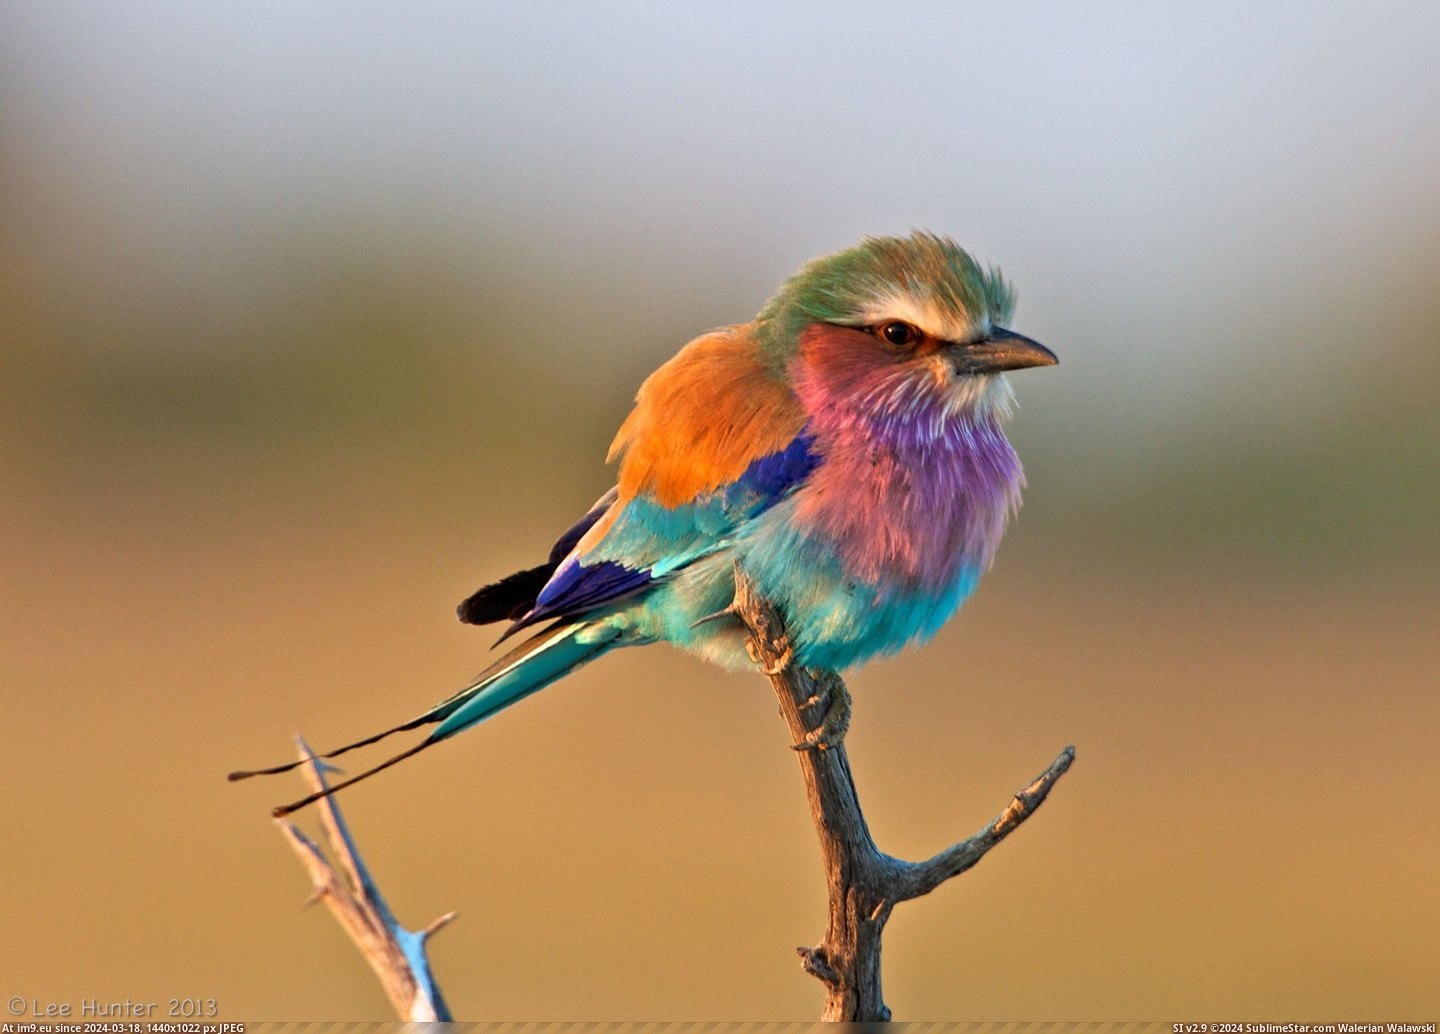 #Cute #Called #Lilac #Roller #Breasted [Pics] Cute little thing called the lilac-breasted roller. Pic. (Image of album My r/PICS favs))